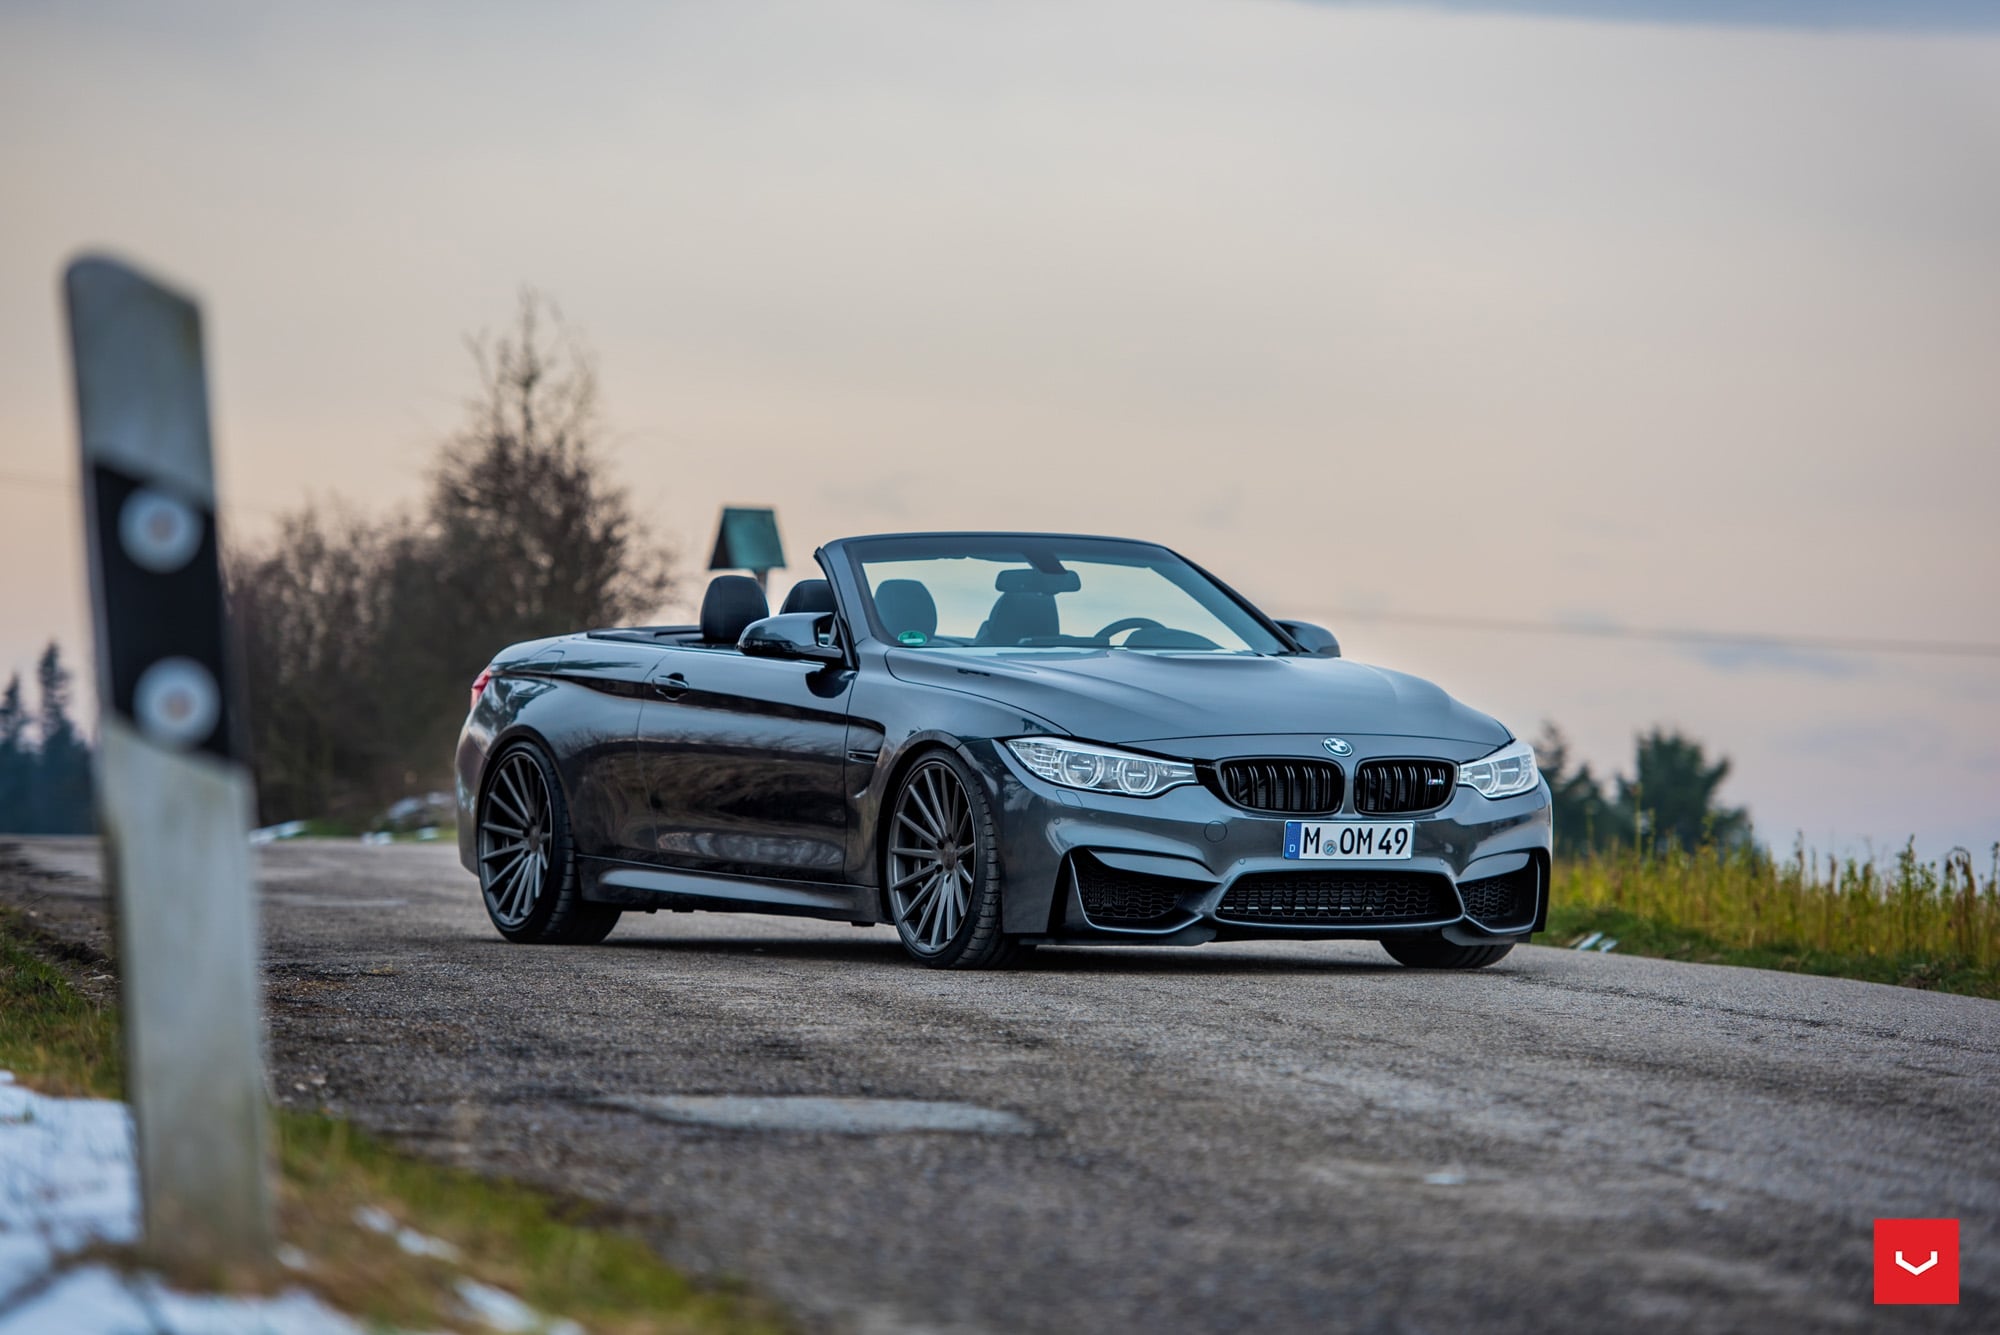 Full gallery of 2016 BMW M4 Convertible wallpapers for Desktop